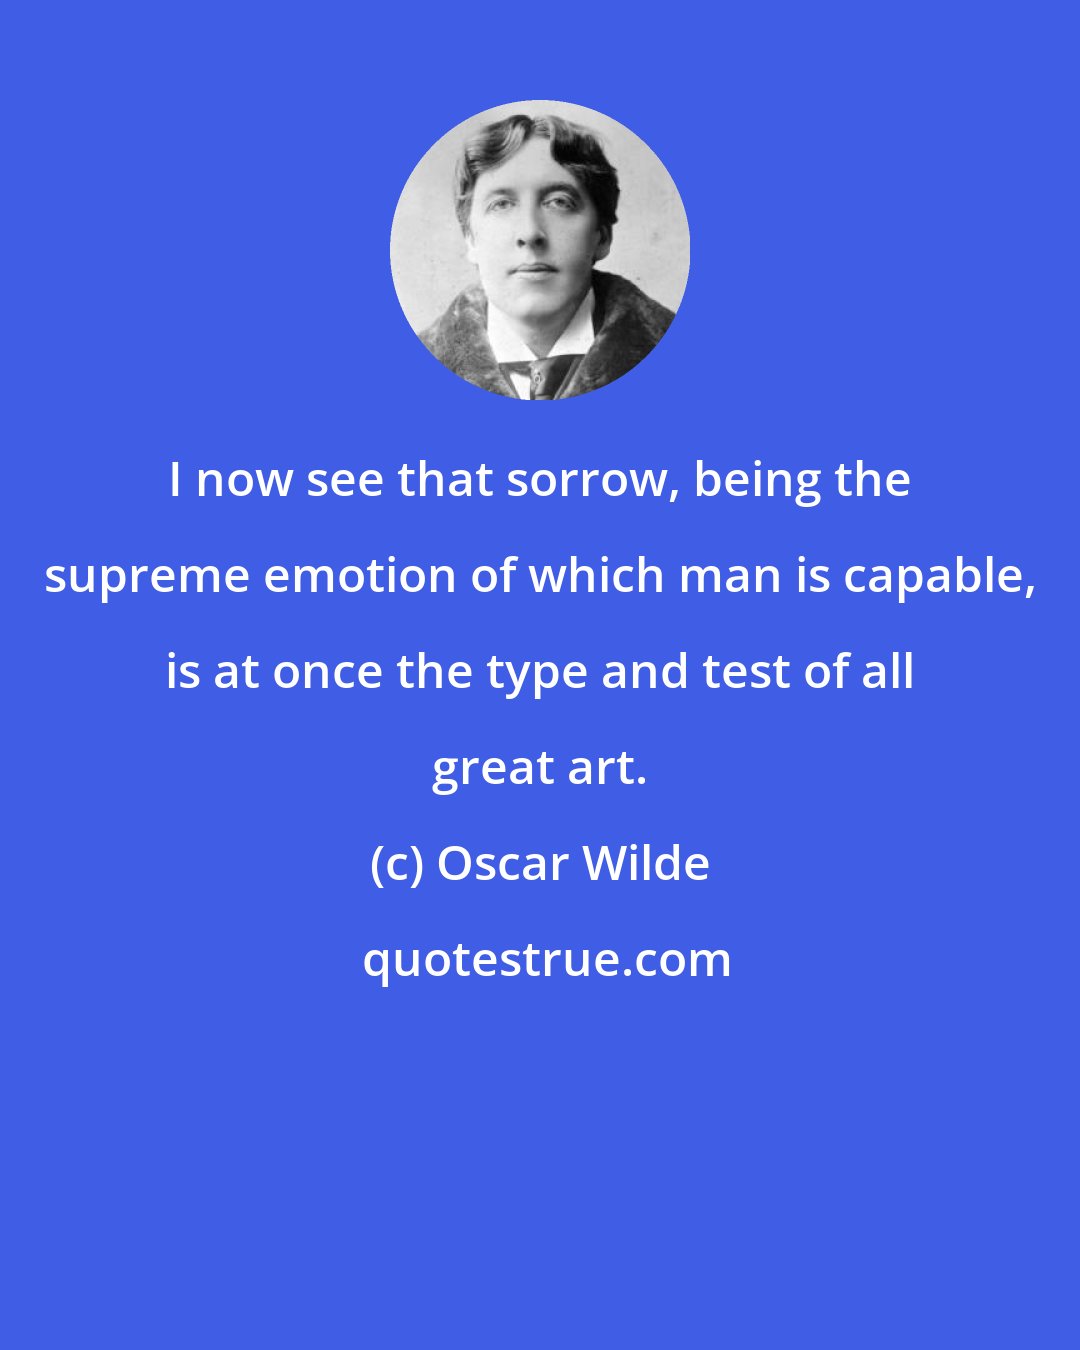 Oscar Wilde: I now see that sorrow, being the supreme emotion of which man is capable, is at once the type and test of all great art.